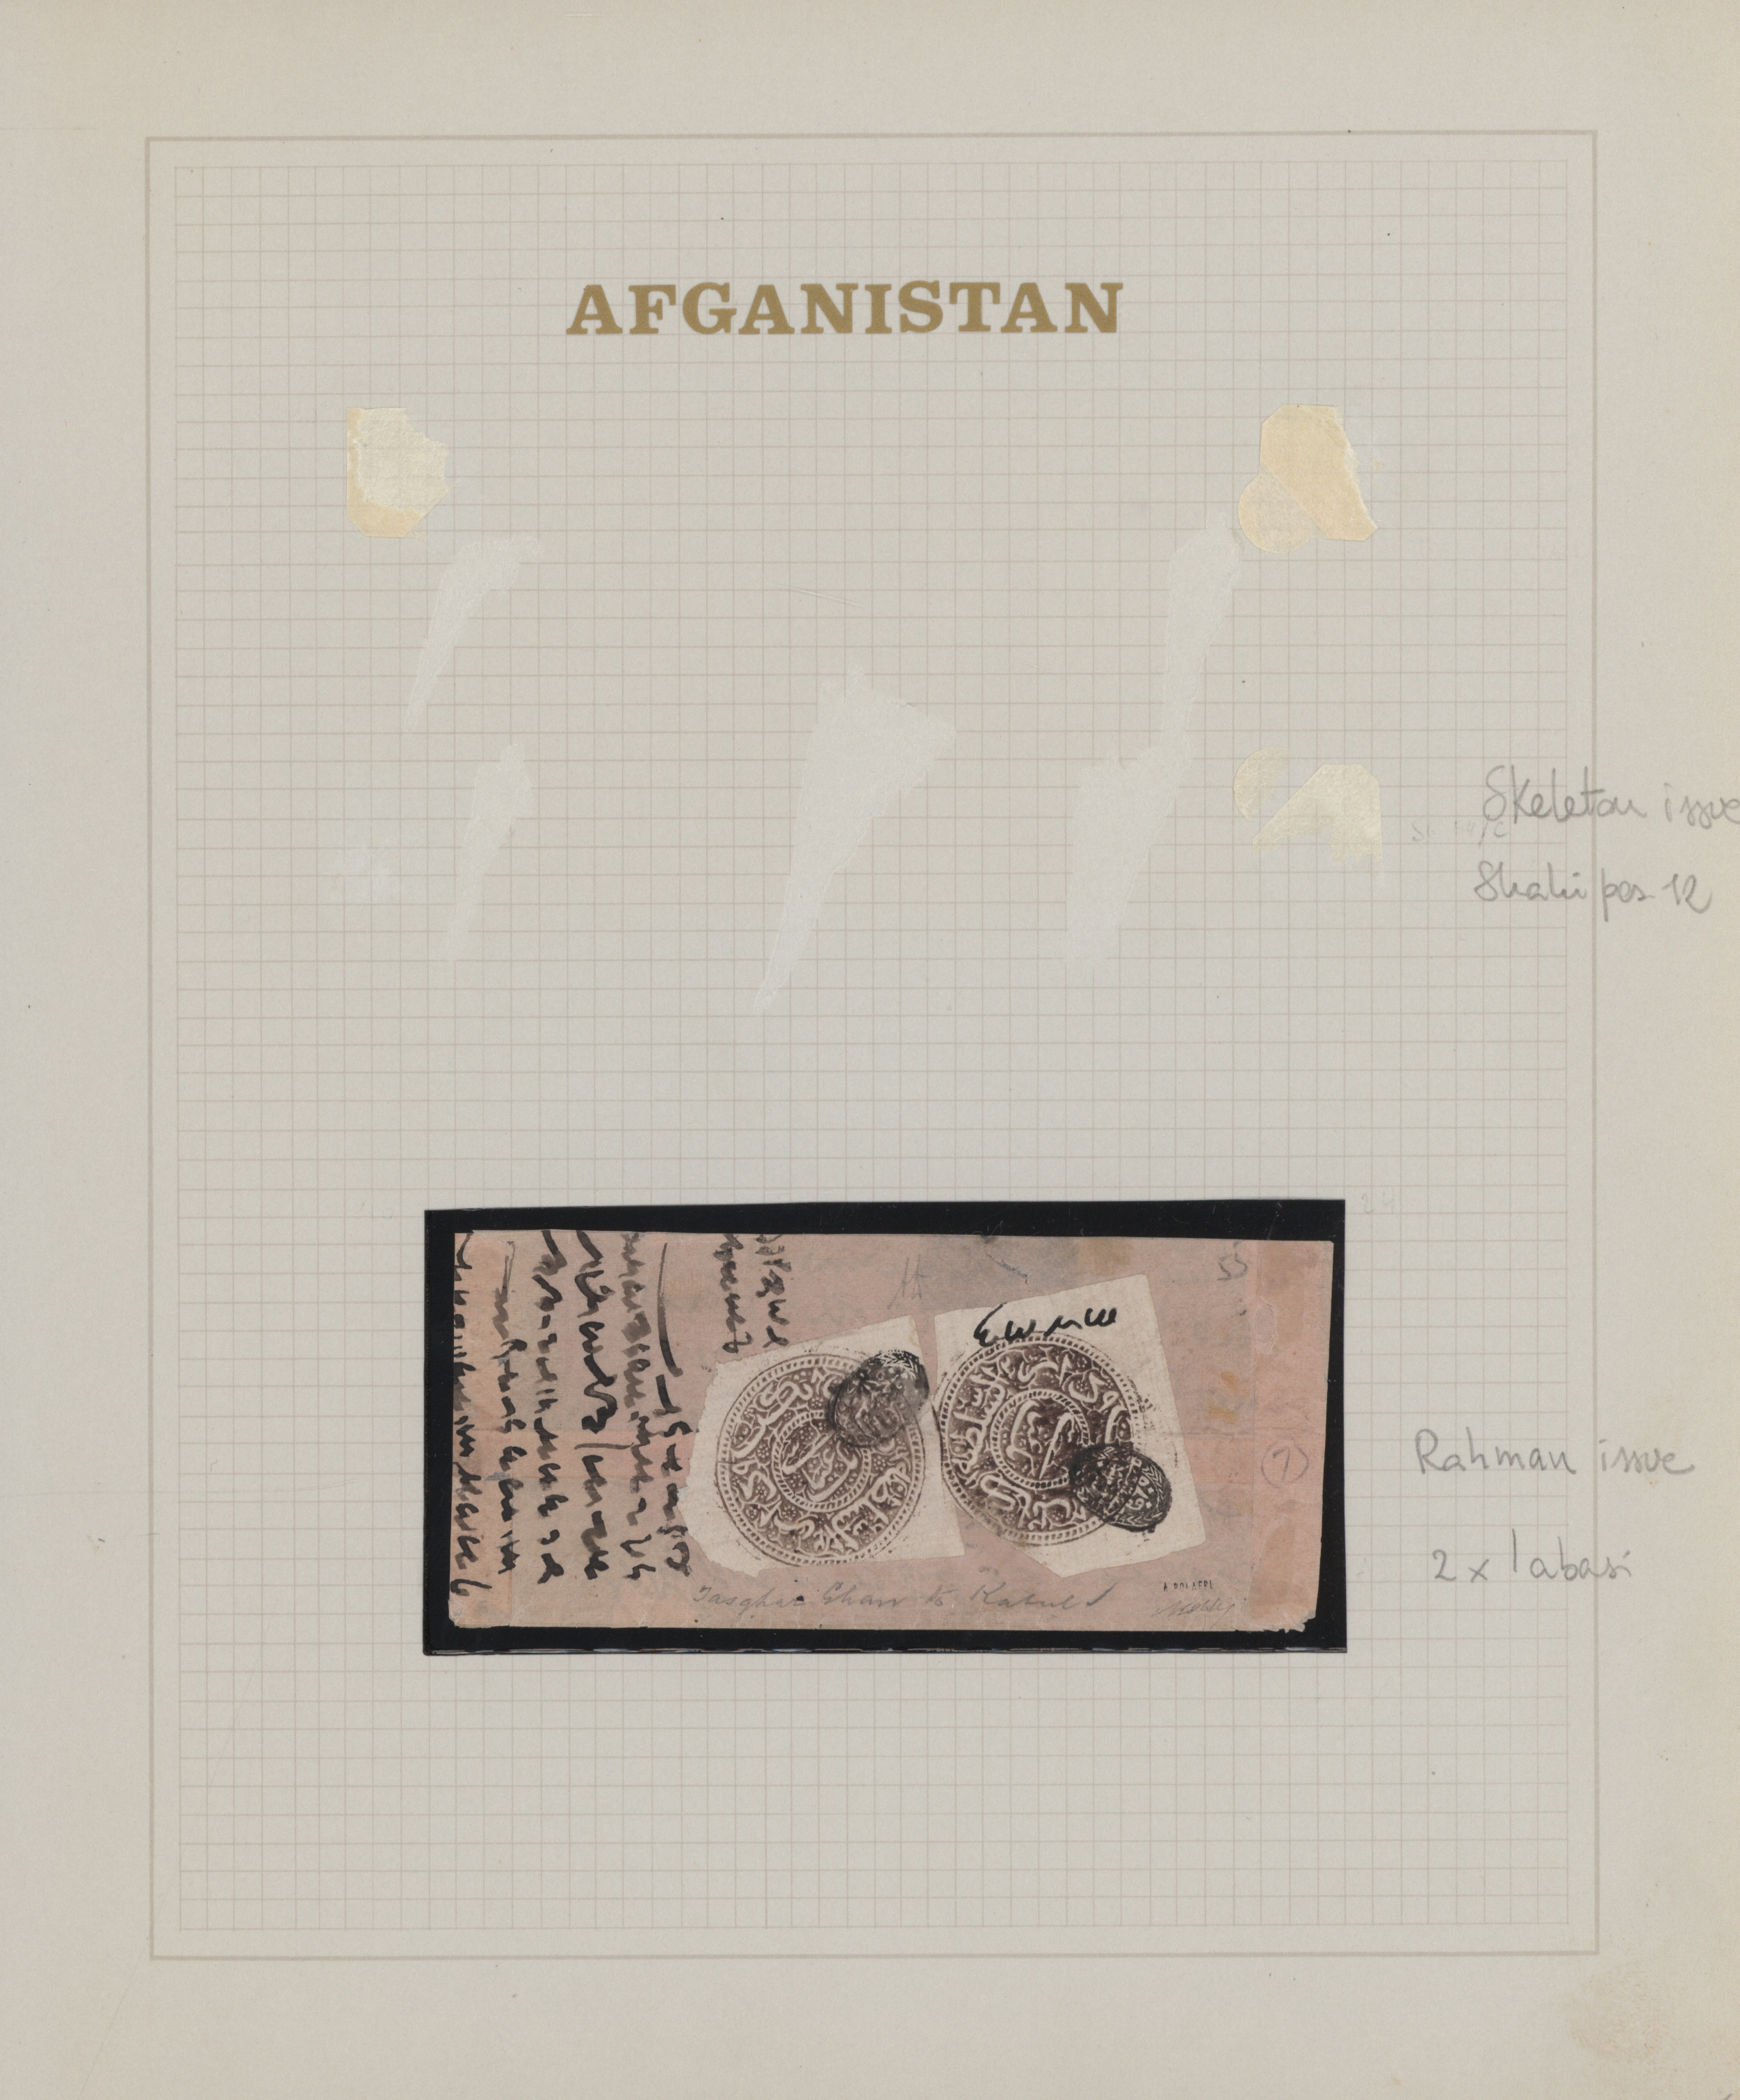 Lot 09037 - Afghanistan  -  Auktionshaus Christoph Gärtner GmbH & Co. KG 51th Auction - Day 4